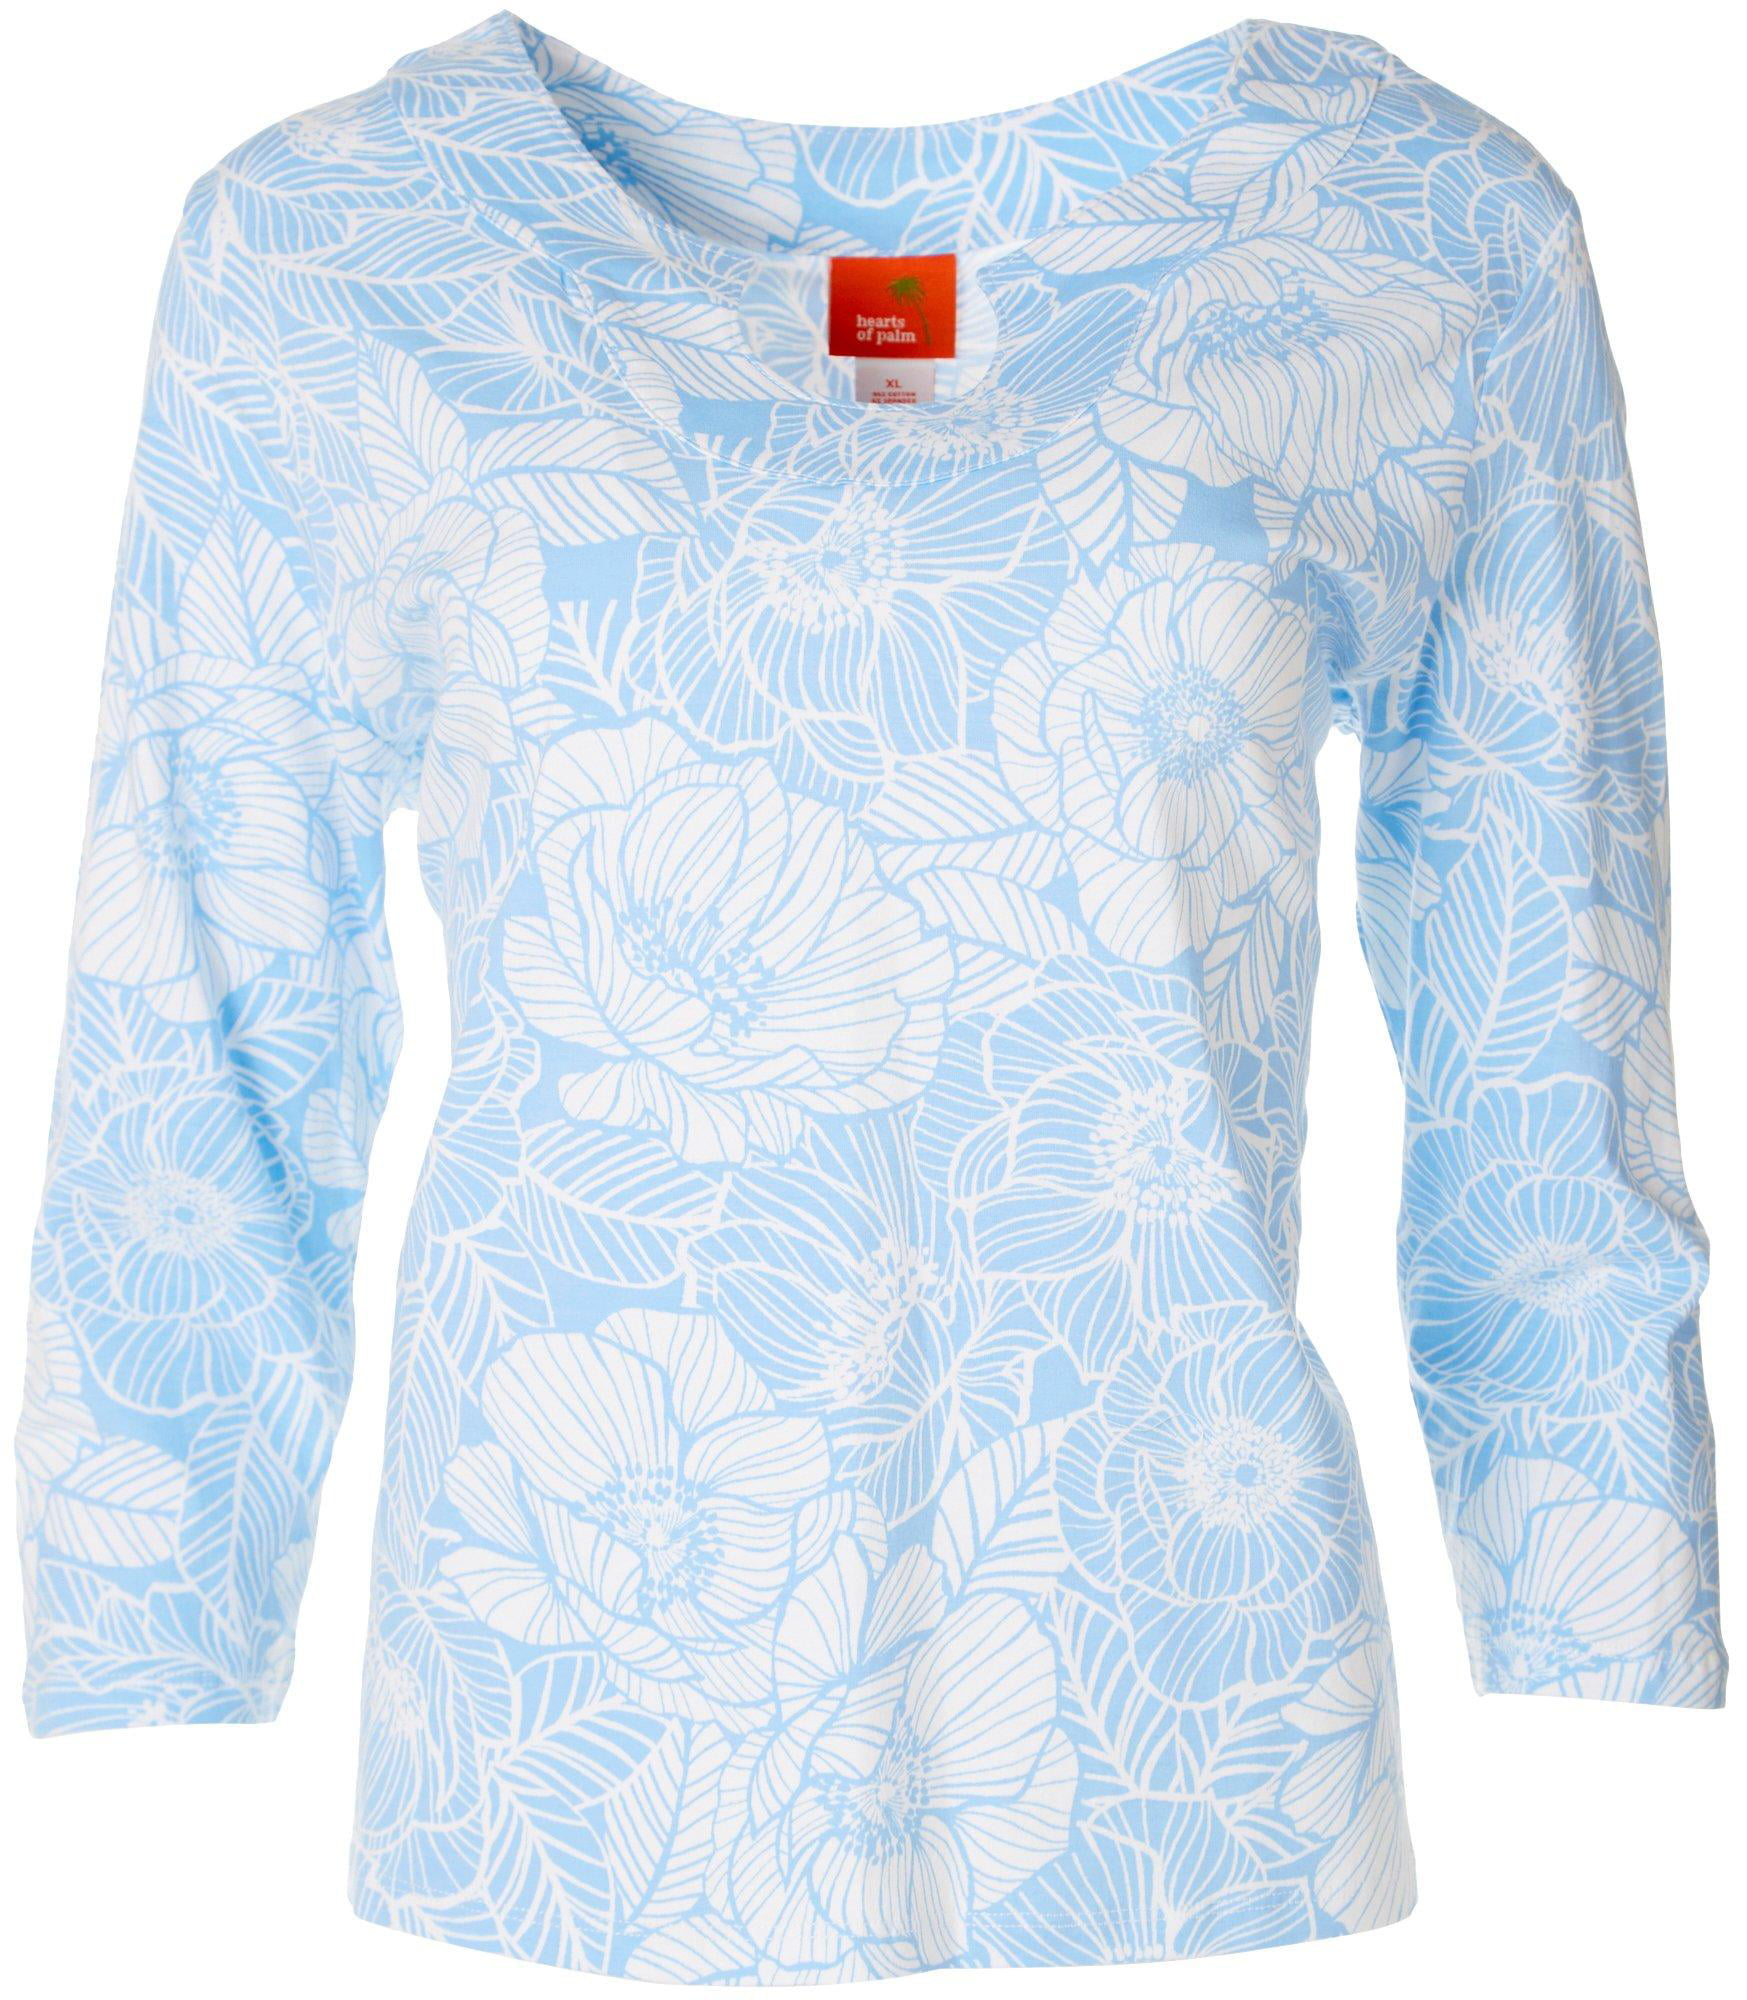 Ladies NEXT Plum Pink & Blue Floral 3/4 Sleeve Top NEW Size 10  RRP £24